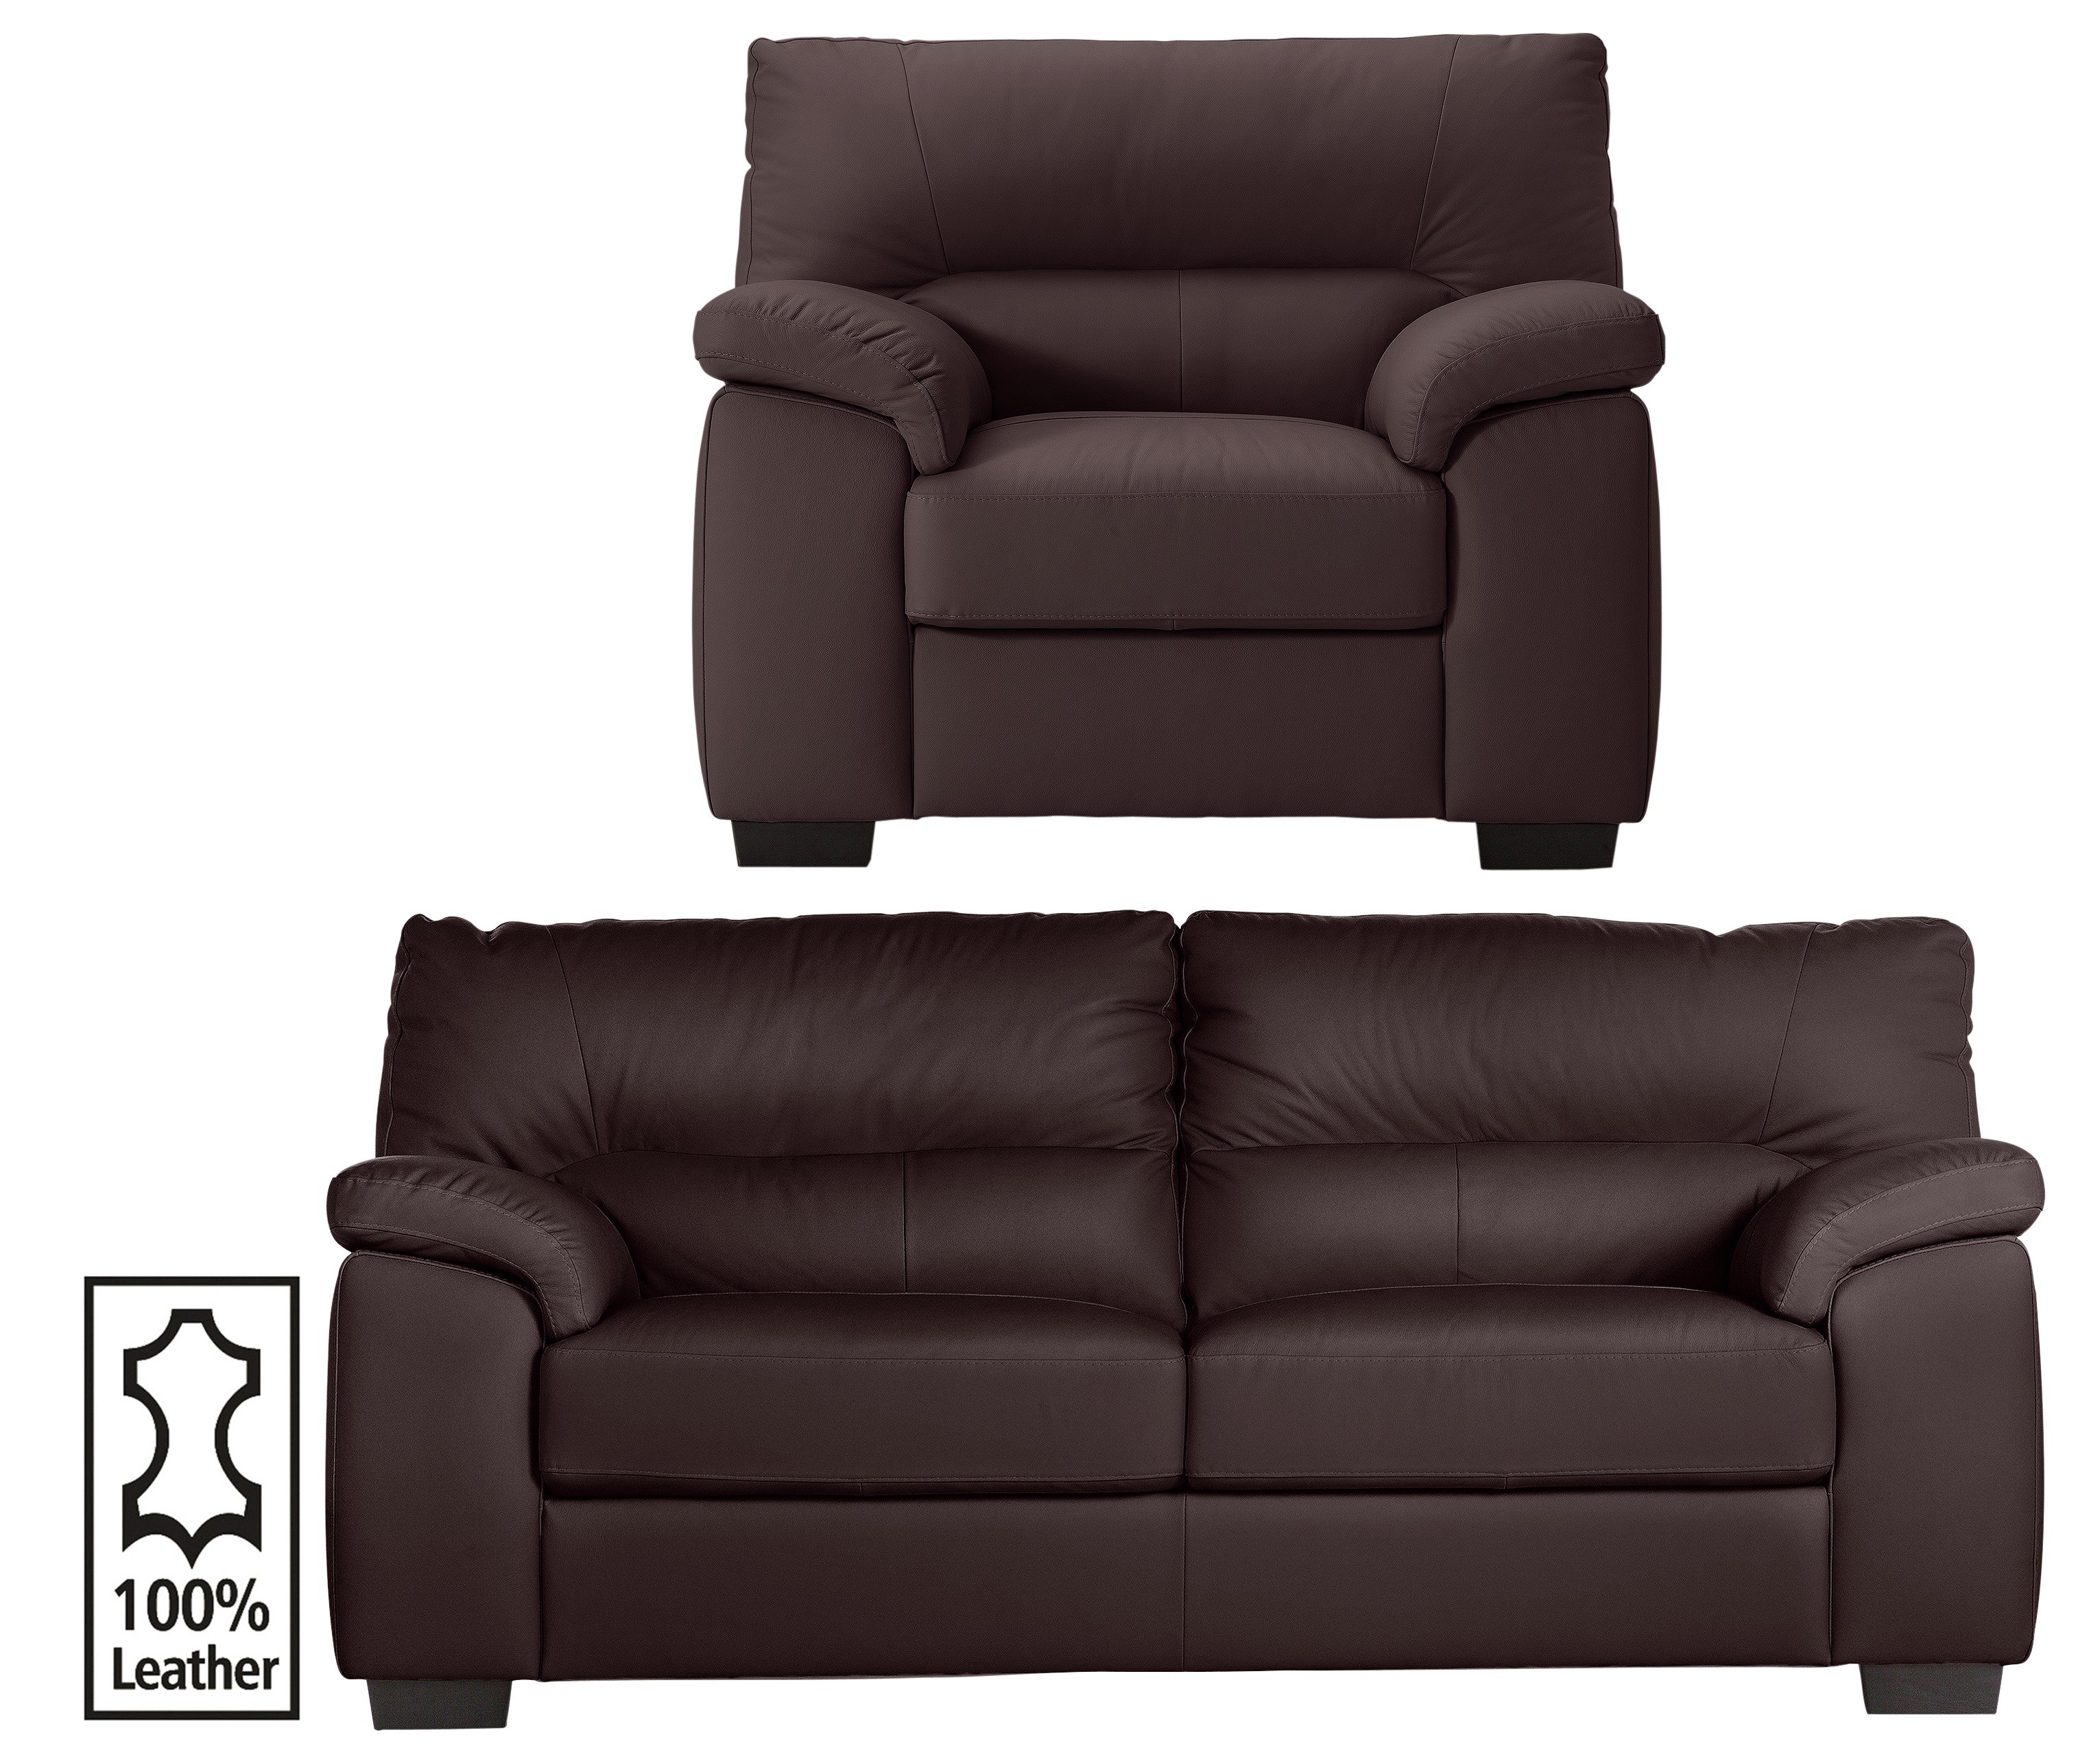 Argos Home Piacenza 3 Seater Leather Sofa and Chair - Walnut (6205665